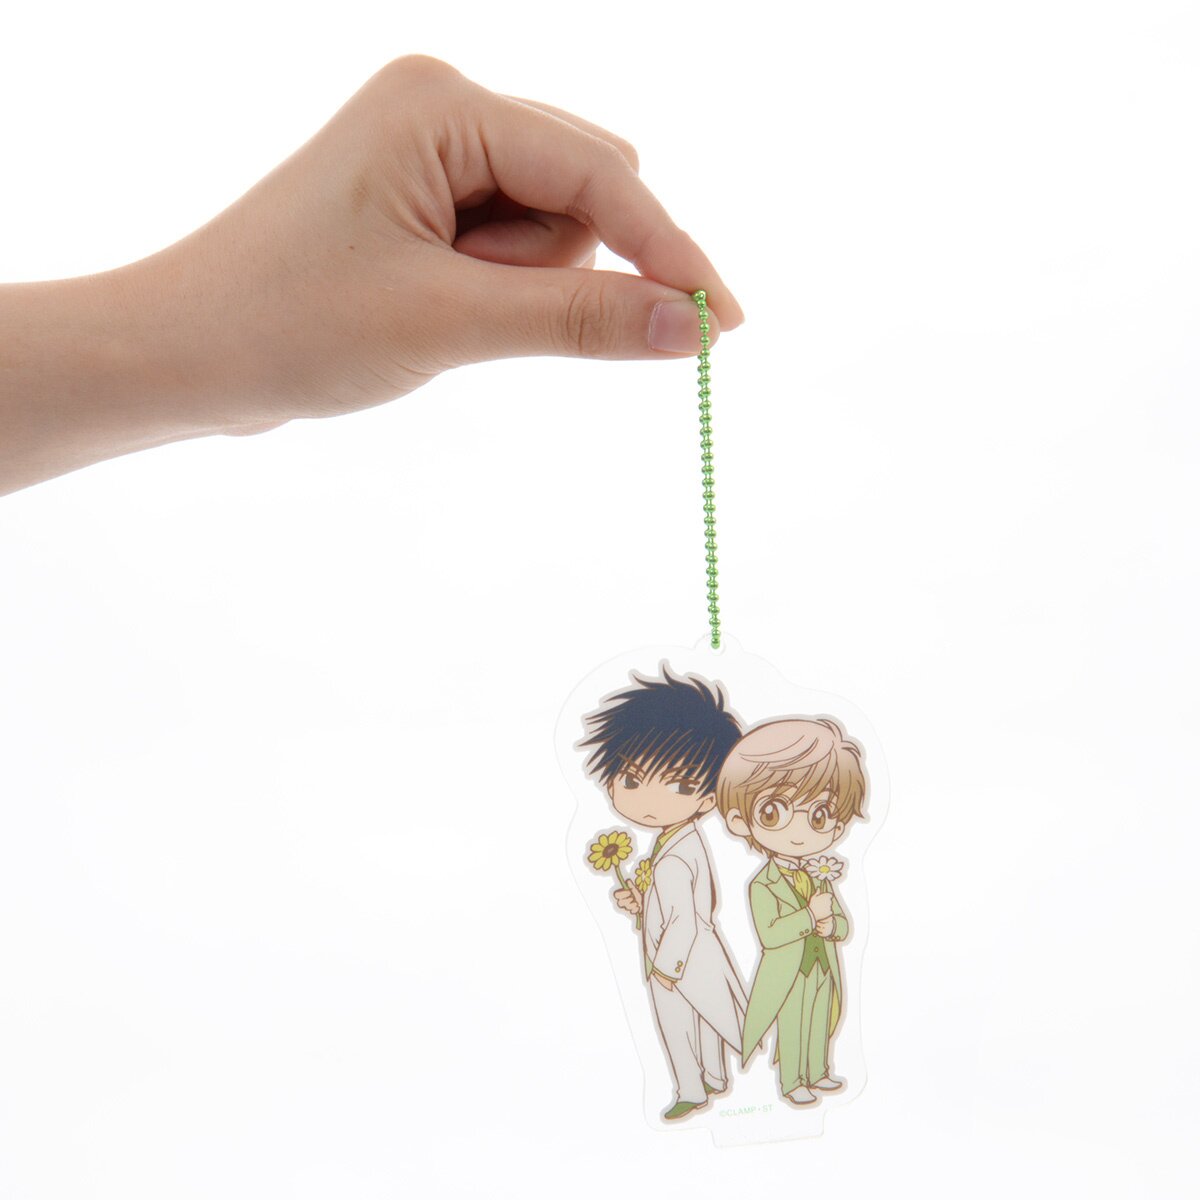 Fairy Ranmaru-Helping Your Heart-Acrylic Stand Collection (BOX)